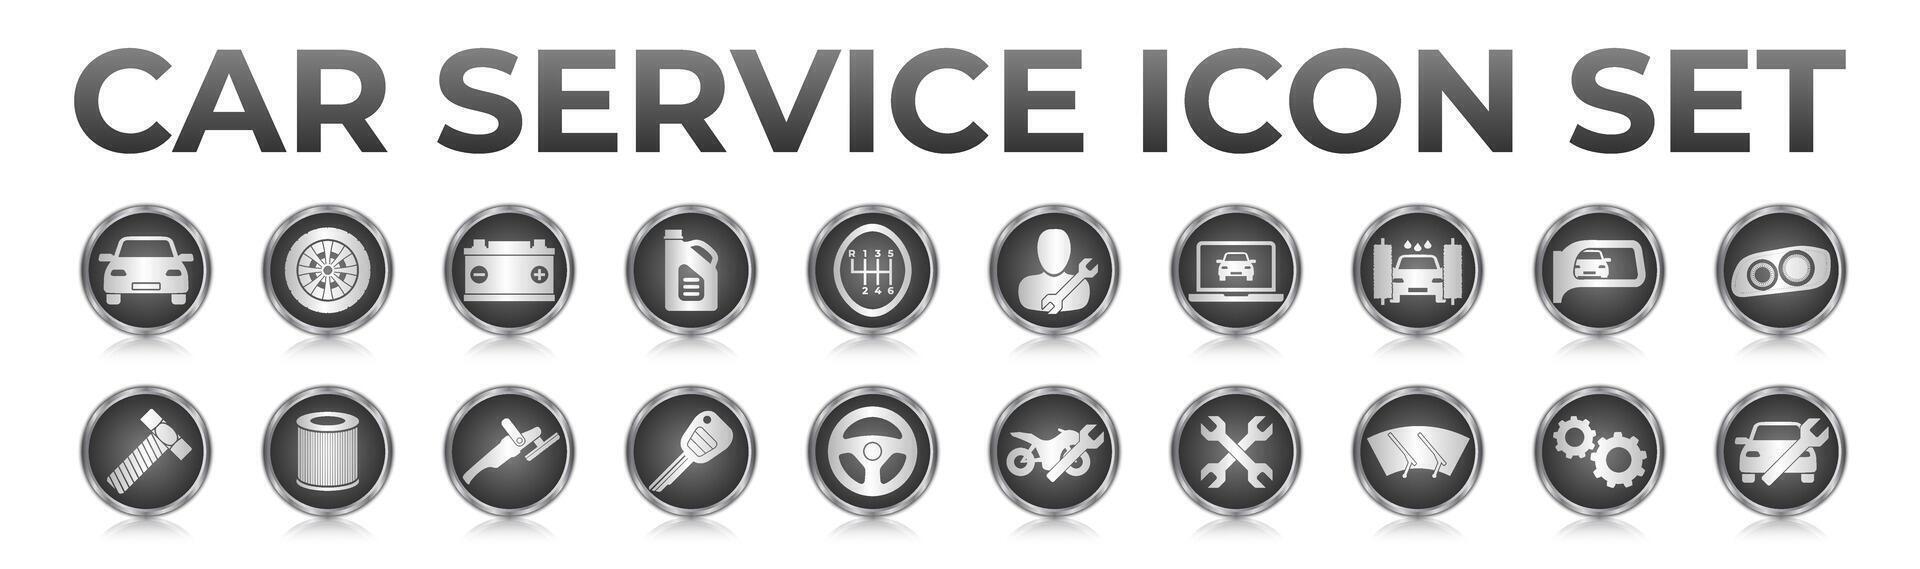 3D Black Car Service Round Web Icons Set with Battery, Oil, Gear Shifter, Filter, Polishing, Key, Steering Wheel, Diagnostic, Wash, Mirror, Headlamp Icons vector